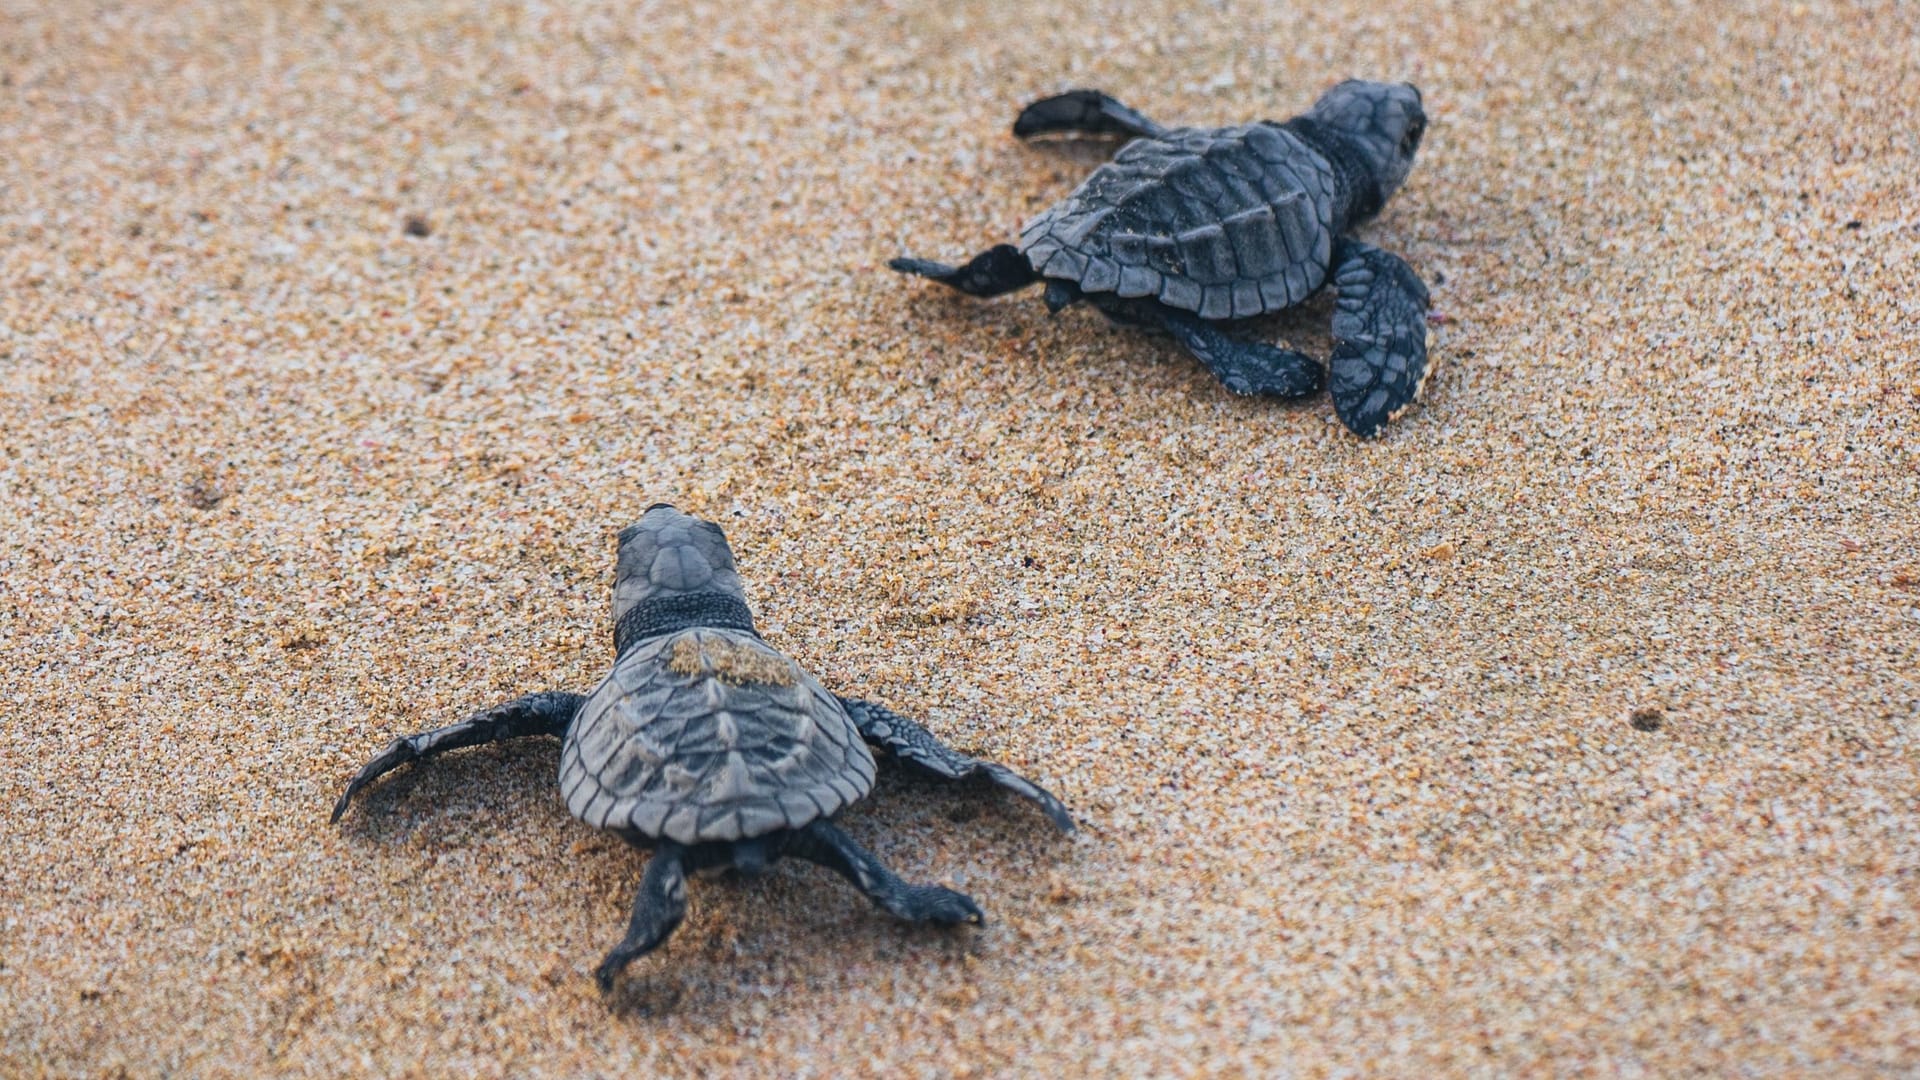 Image: two baby sea turtles crawling in the sand